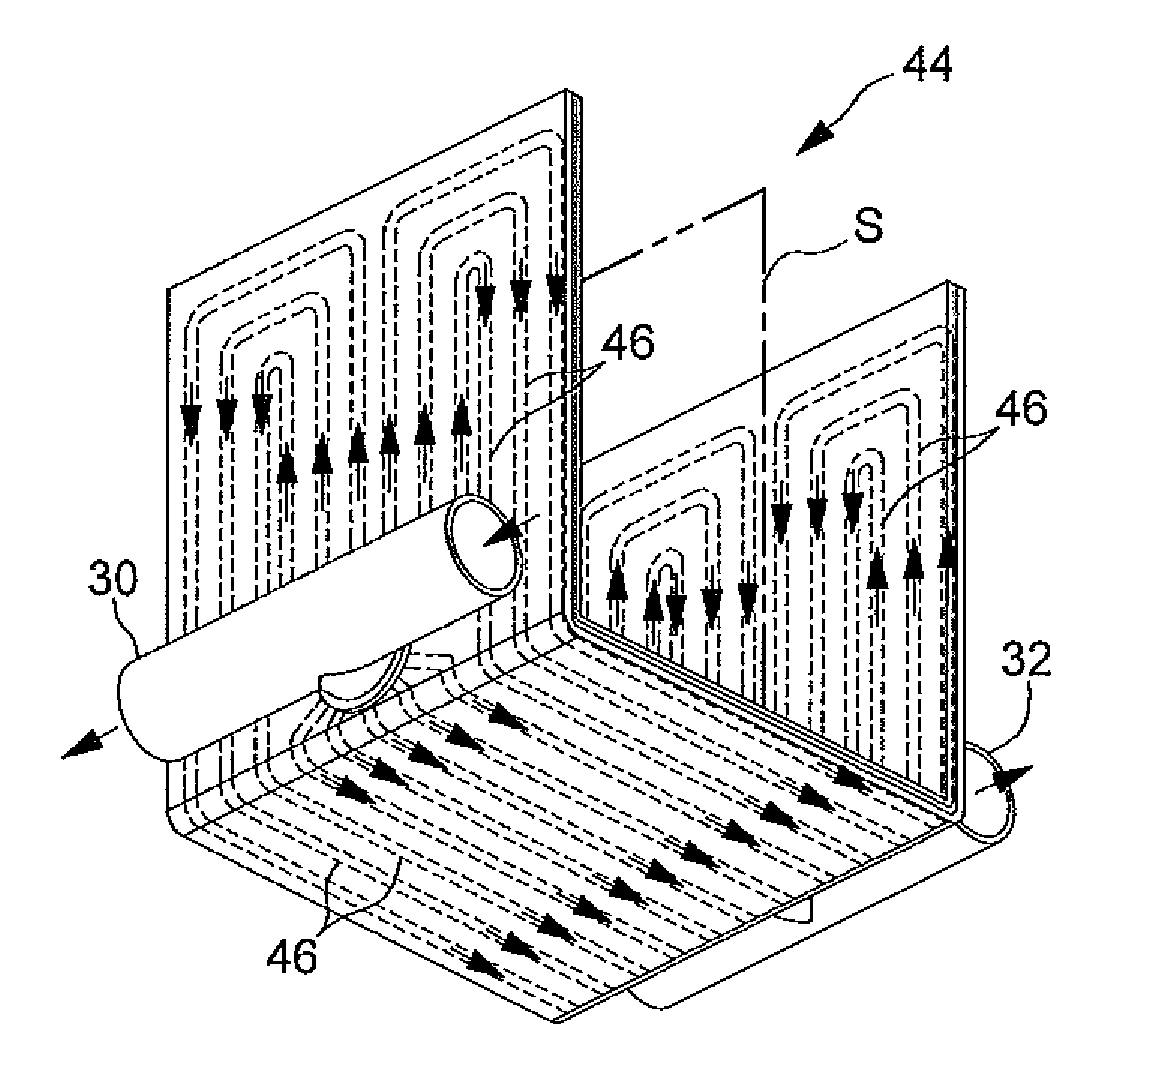 U-formed cooling plate with solid fins for lithium pouch cells